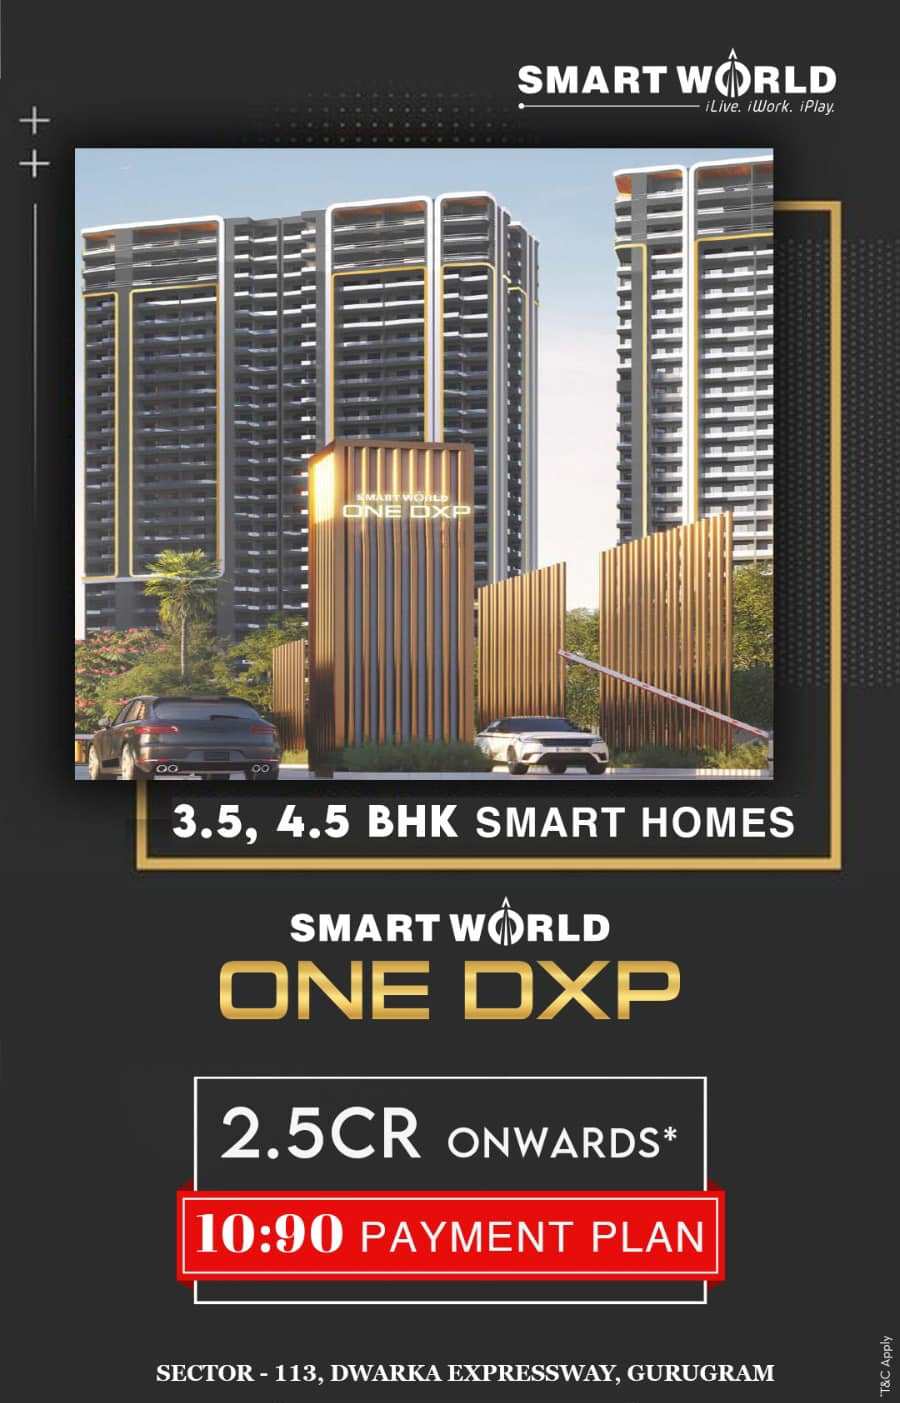 Presenting  10:90 payment plan at Smart World One DXP in Sector 113, Gurgaon Update